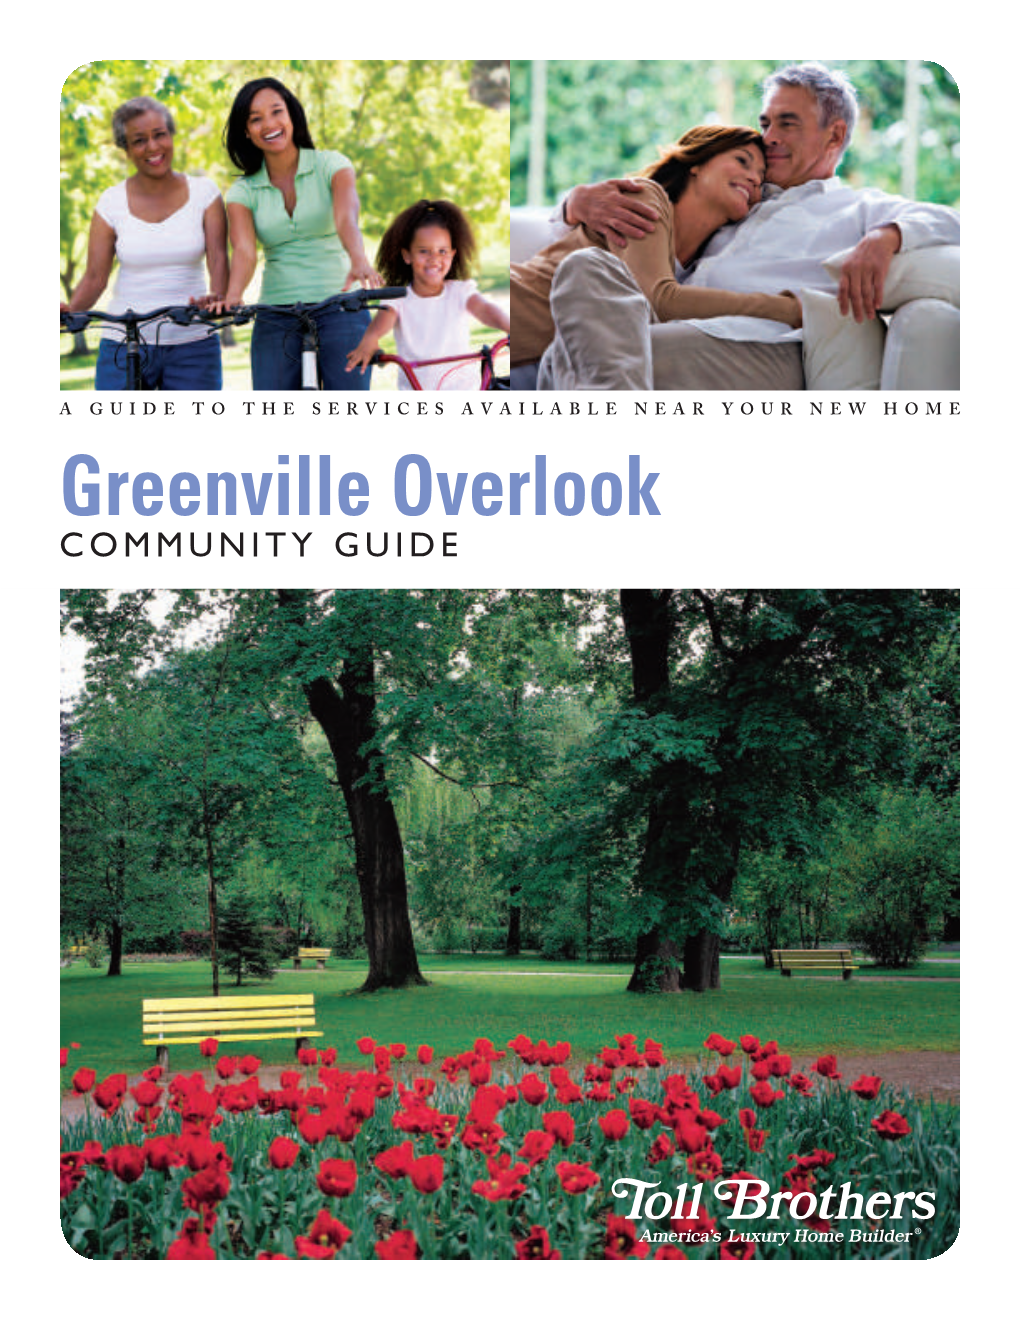 Greenville Overlook Community Guide Copyright 2012 Toll Brothers, Inc